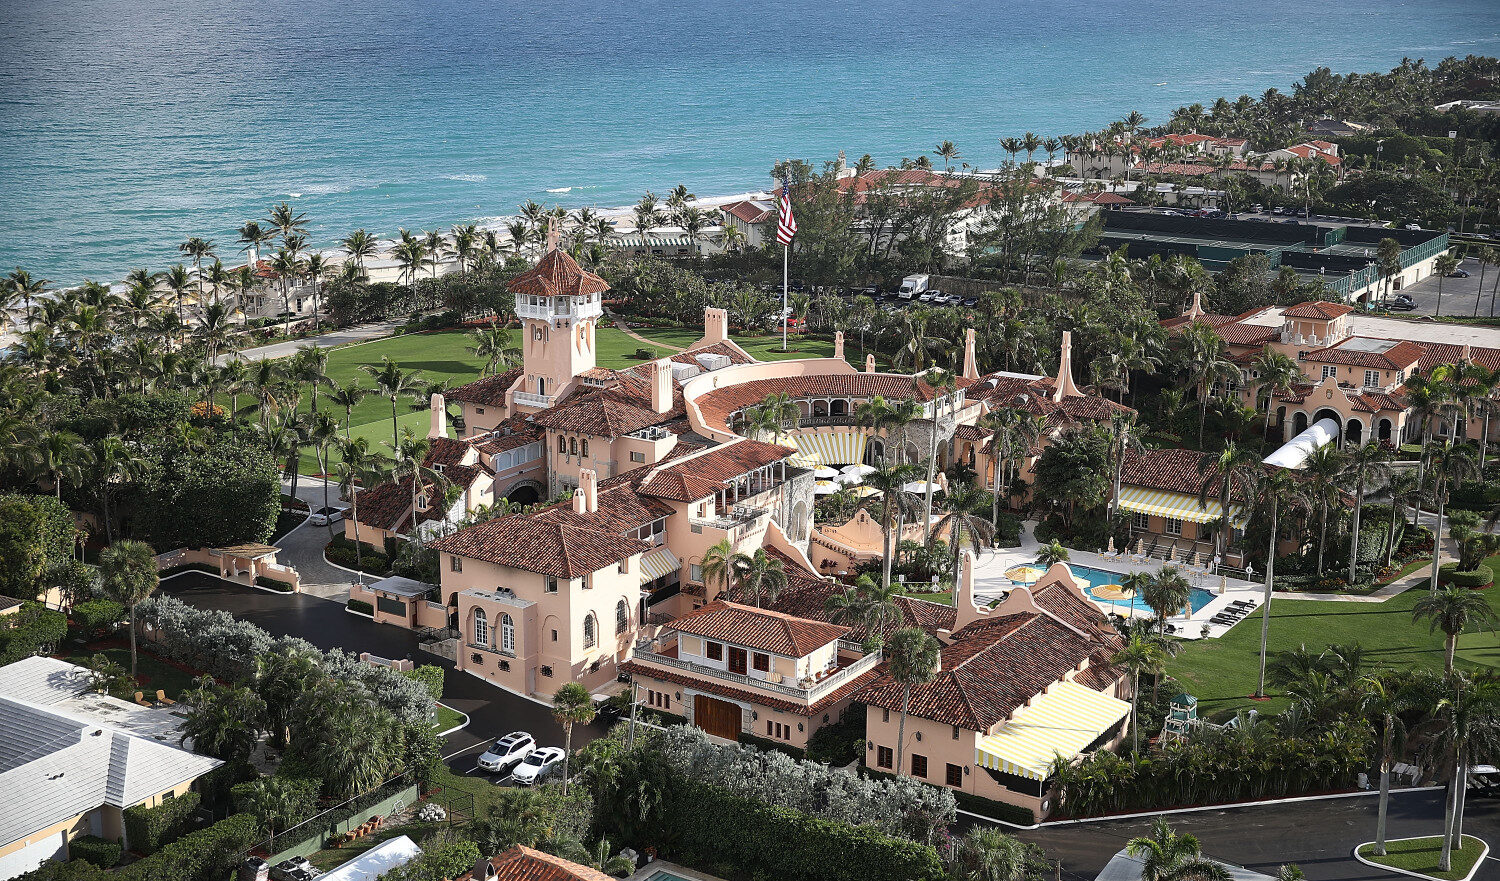 Trump Can Live at MaraLago as Employee, Town Attorney Concludes